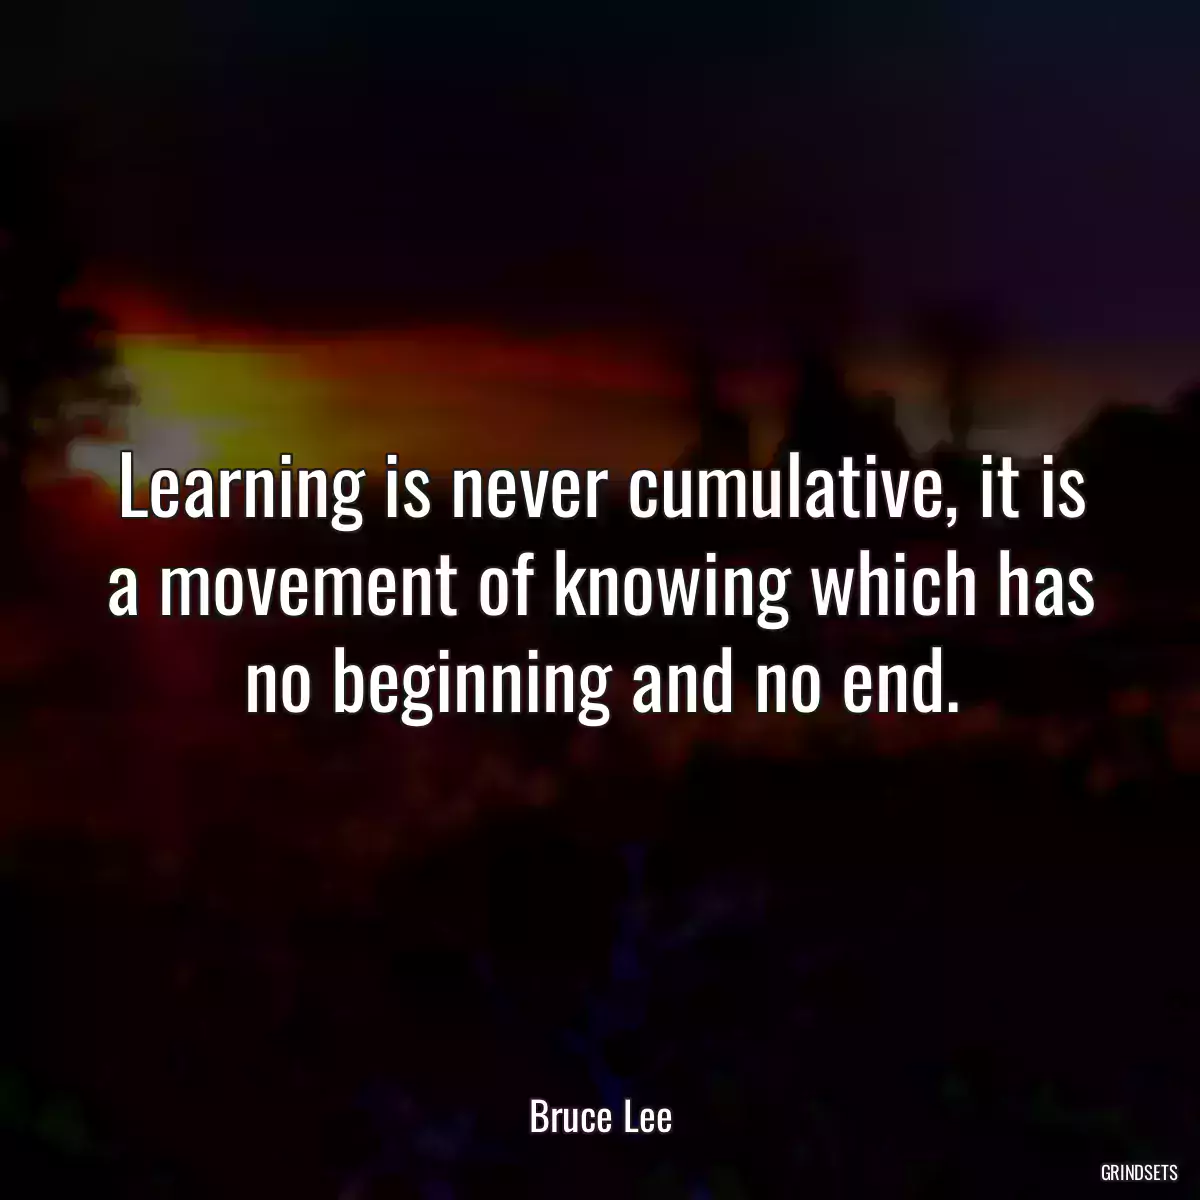 Learning is never cumulative, it is a movement of knowing which has no beginning and no end.